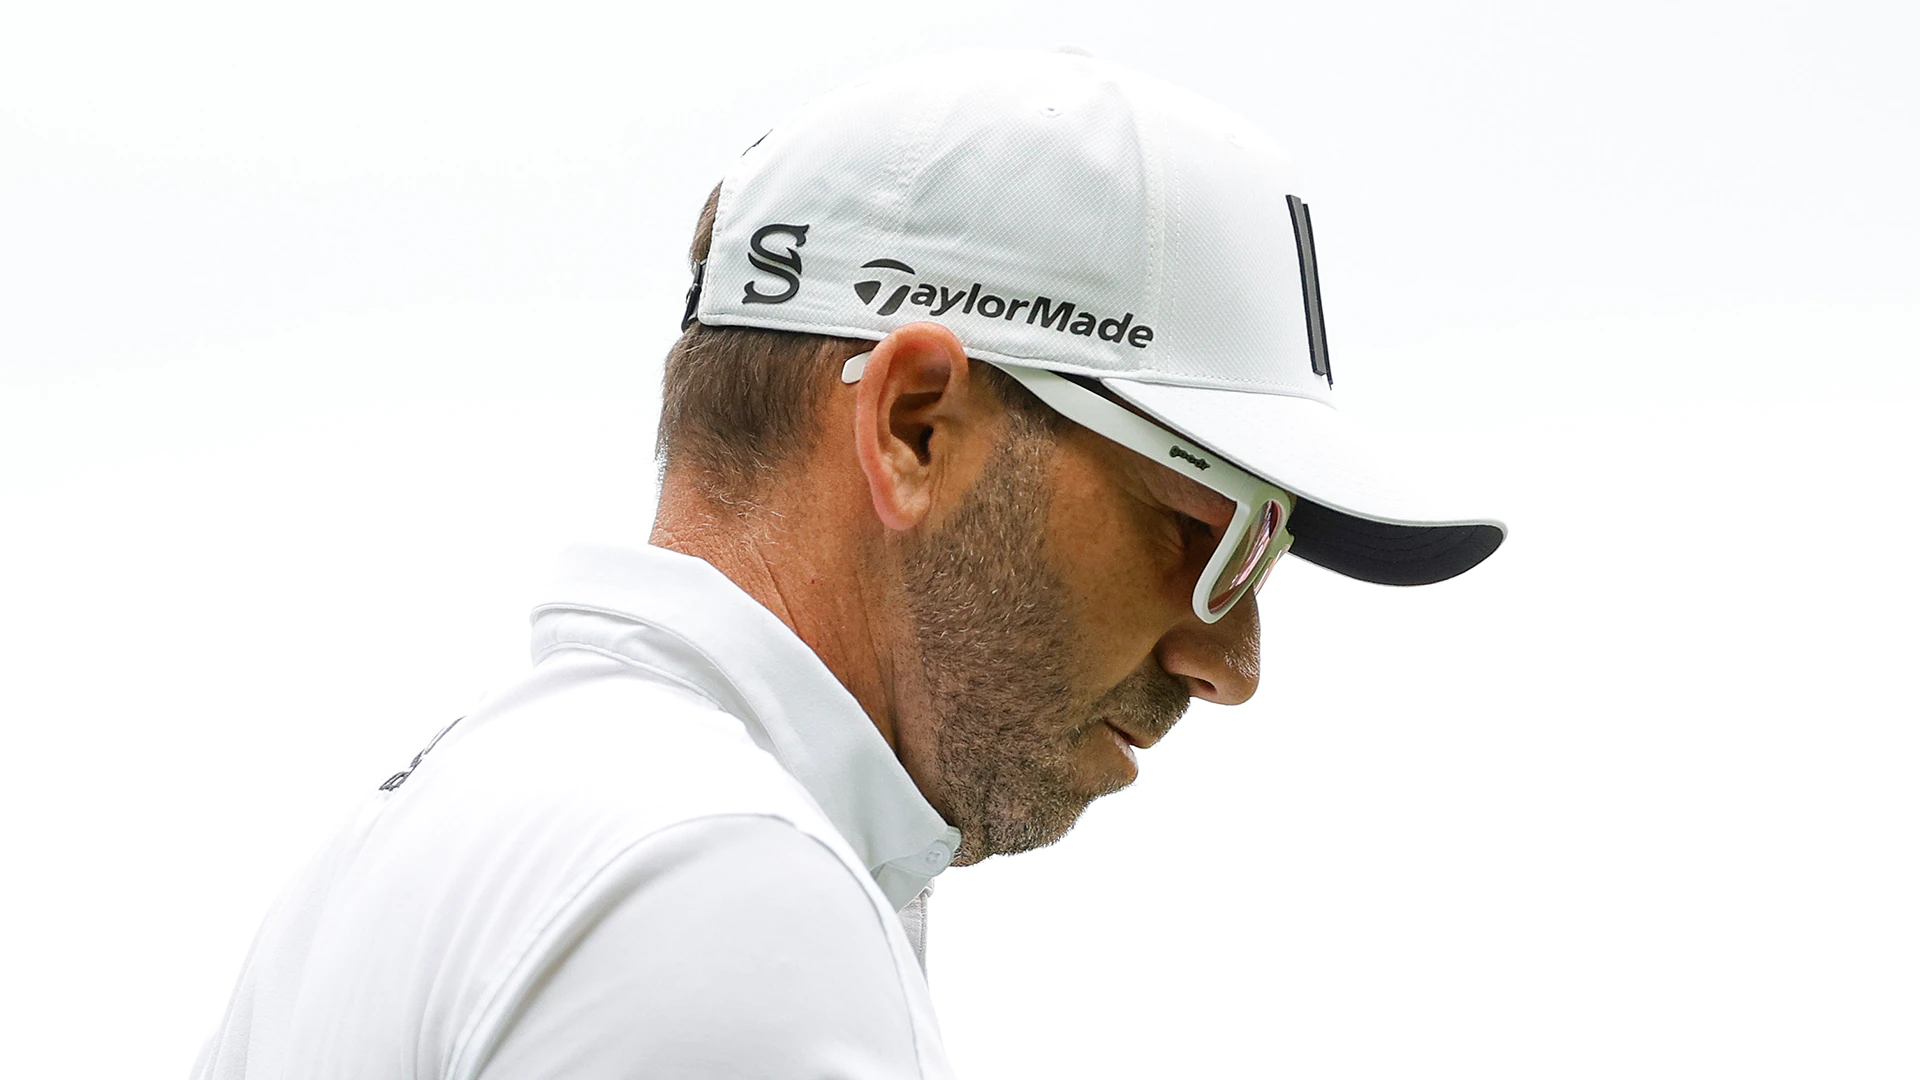 After exceeding ball search time, Sergio Garcia says ‘I can’t wait to leave this tour’